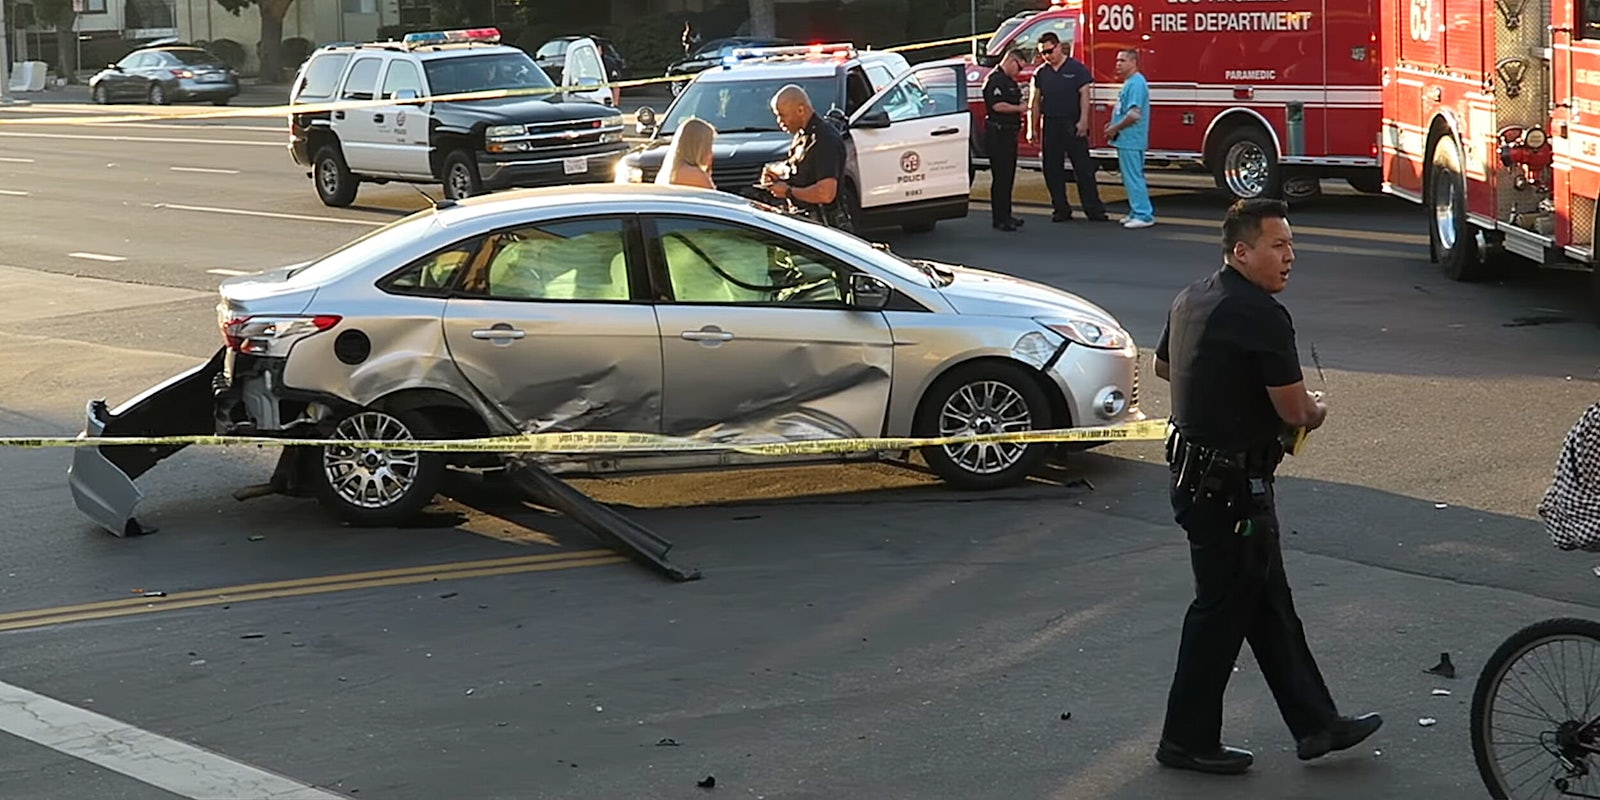 Police officer deploying yellow tape around accident scene